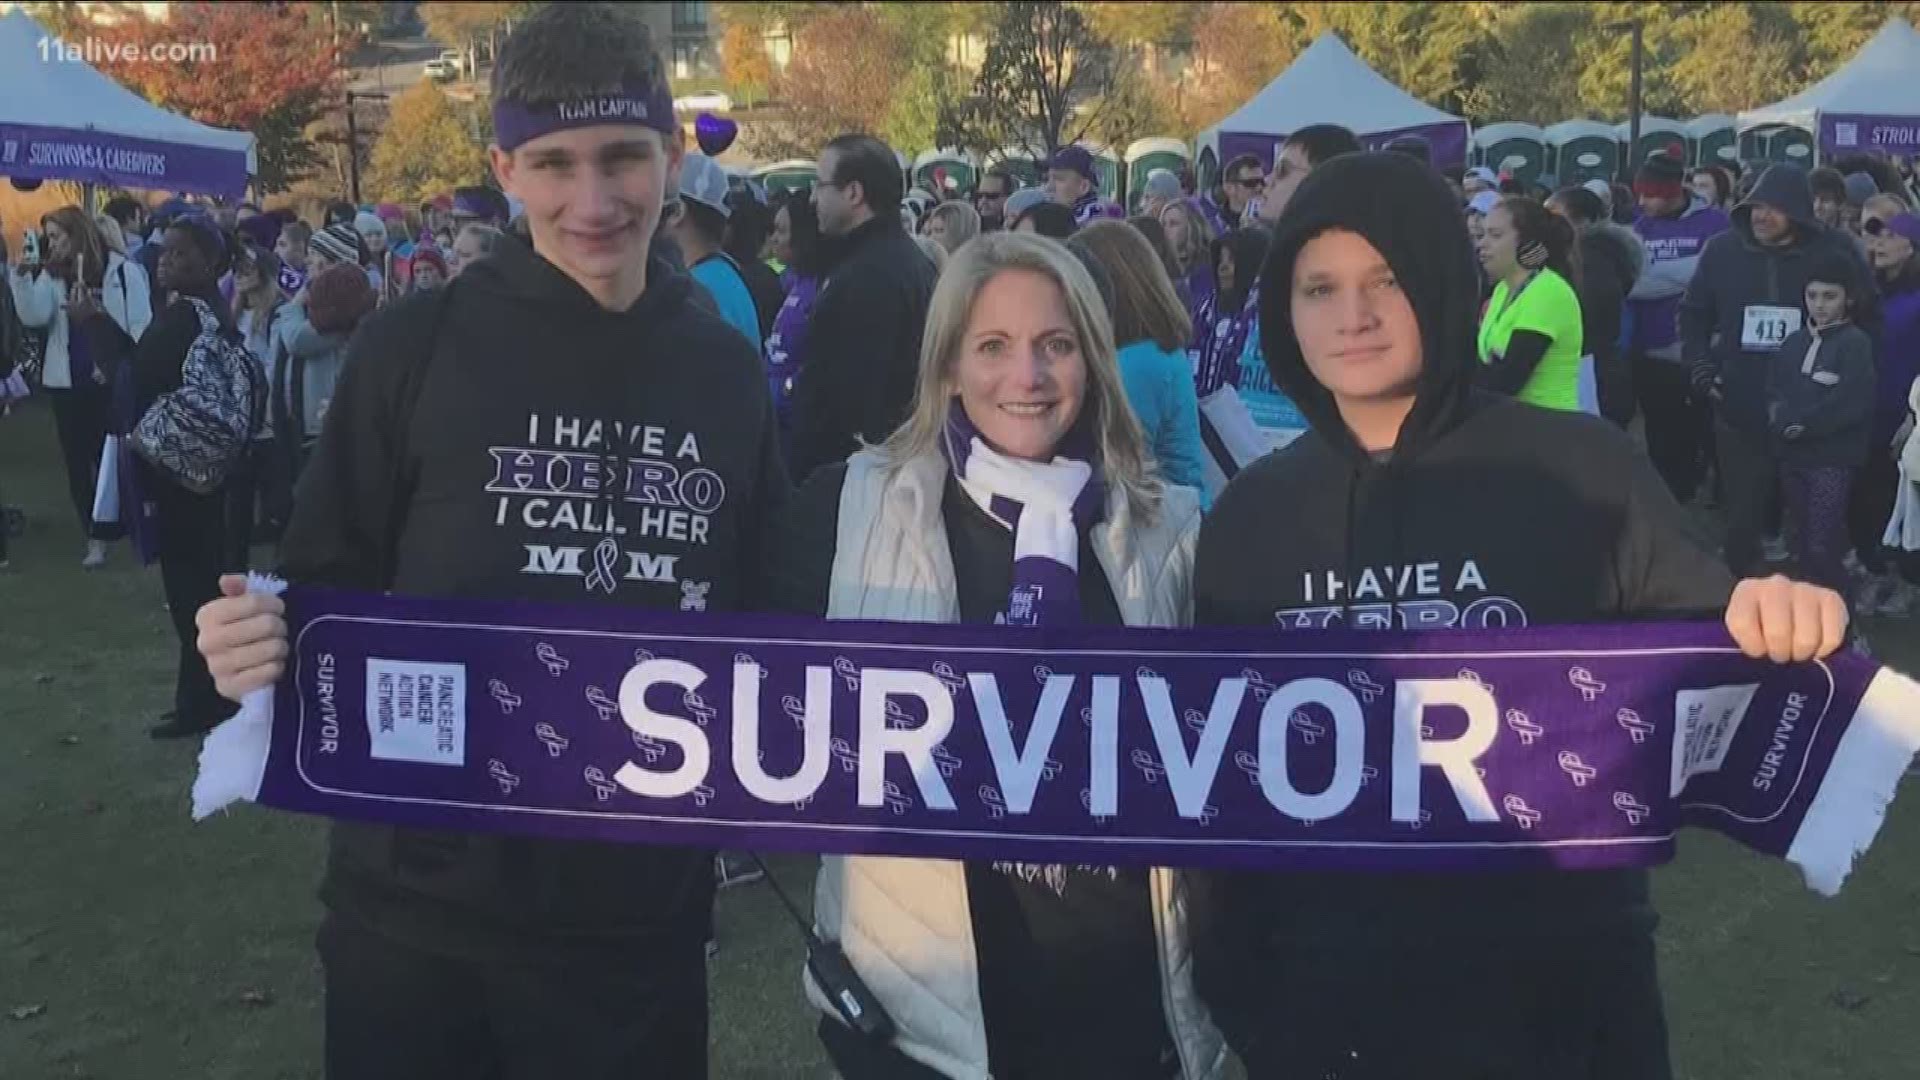 Elise Tedeschi had stage 4 pancreatic cancer and wrote an open letter to Alex Trebek offering him hope and prayers as he battles the same disease.